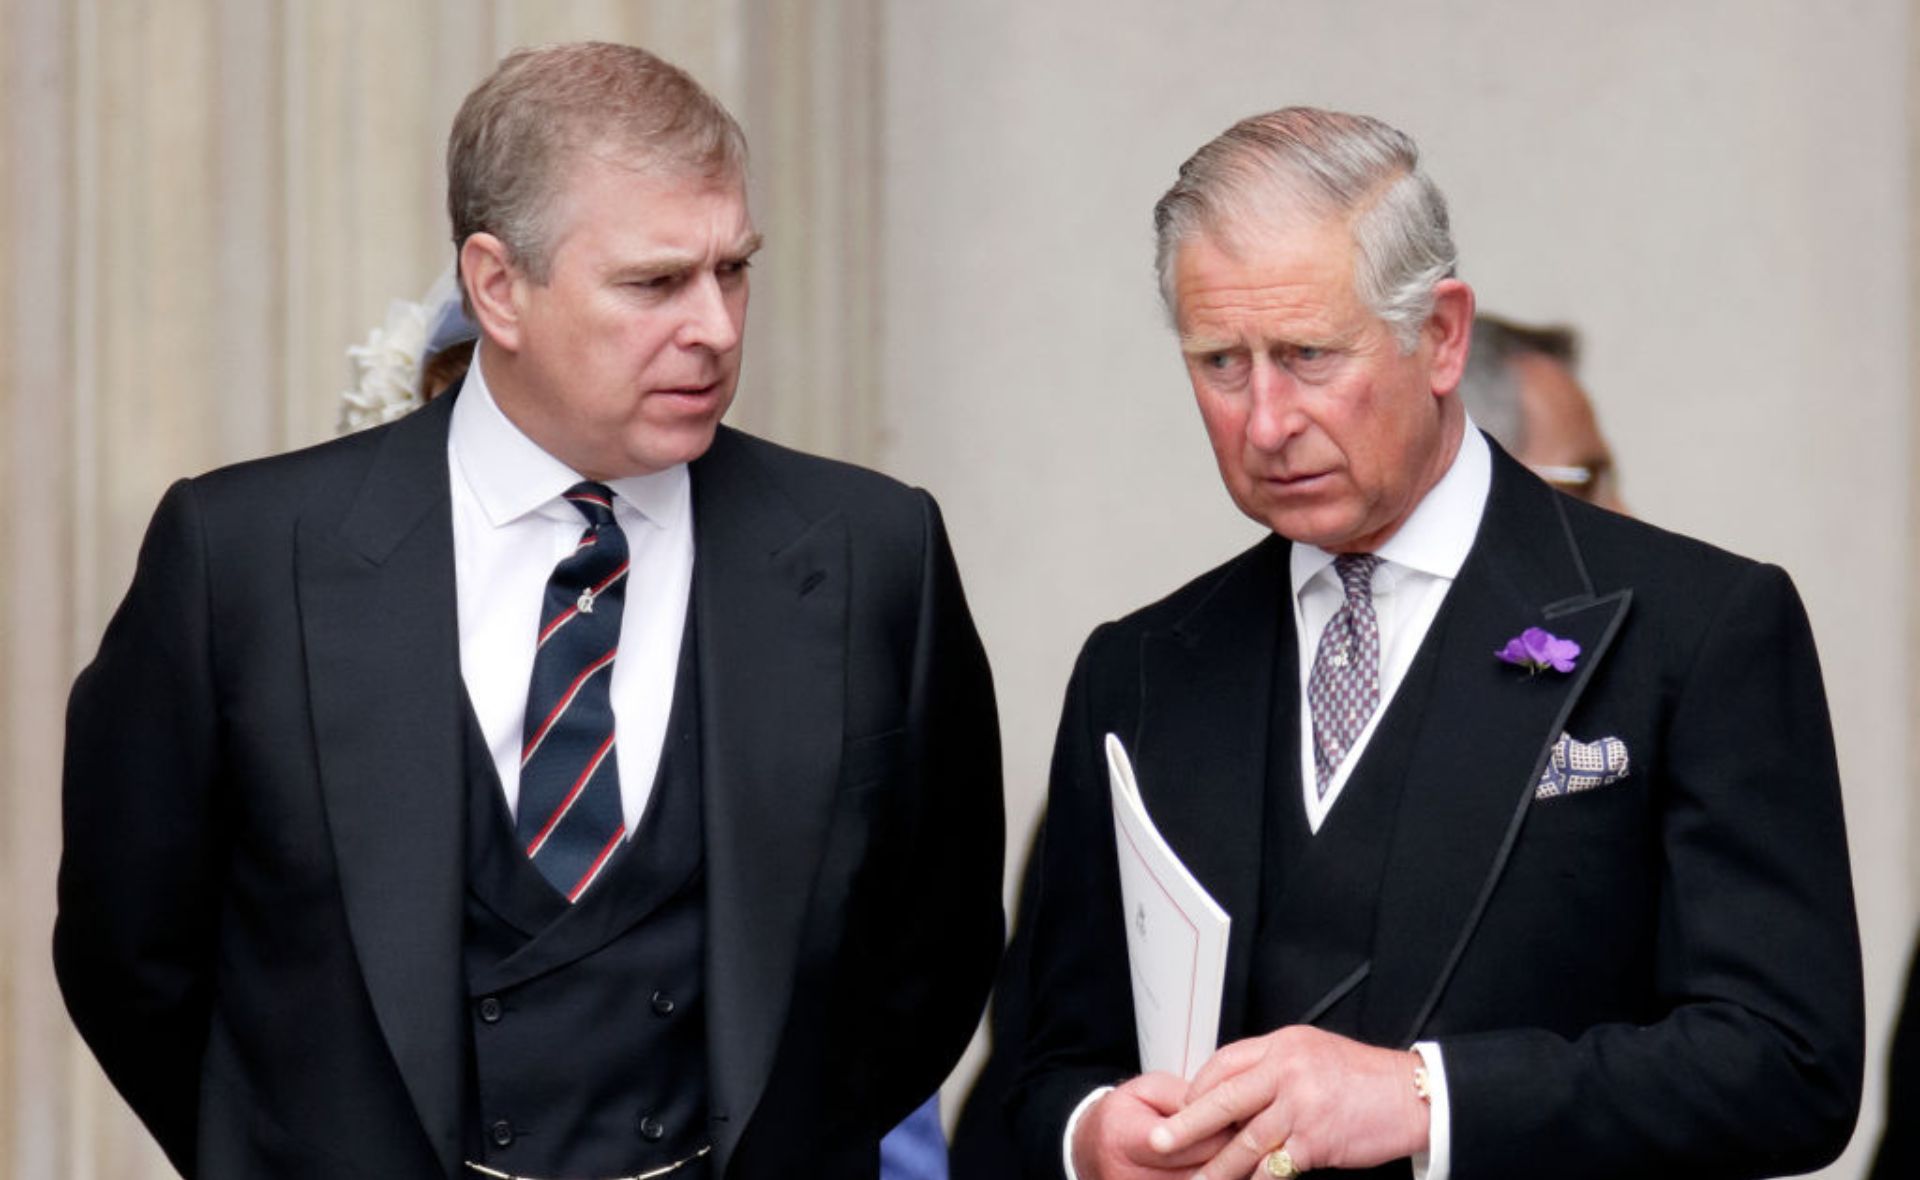 Prince Andrew ”snubbed” once more